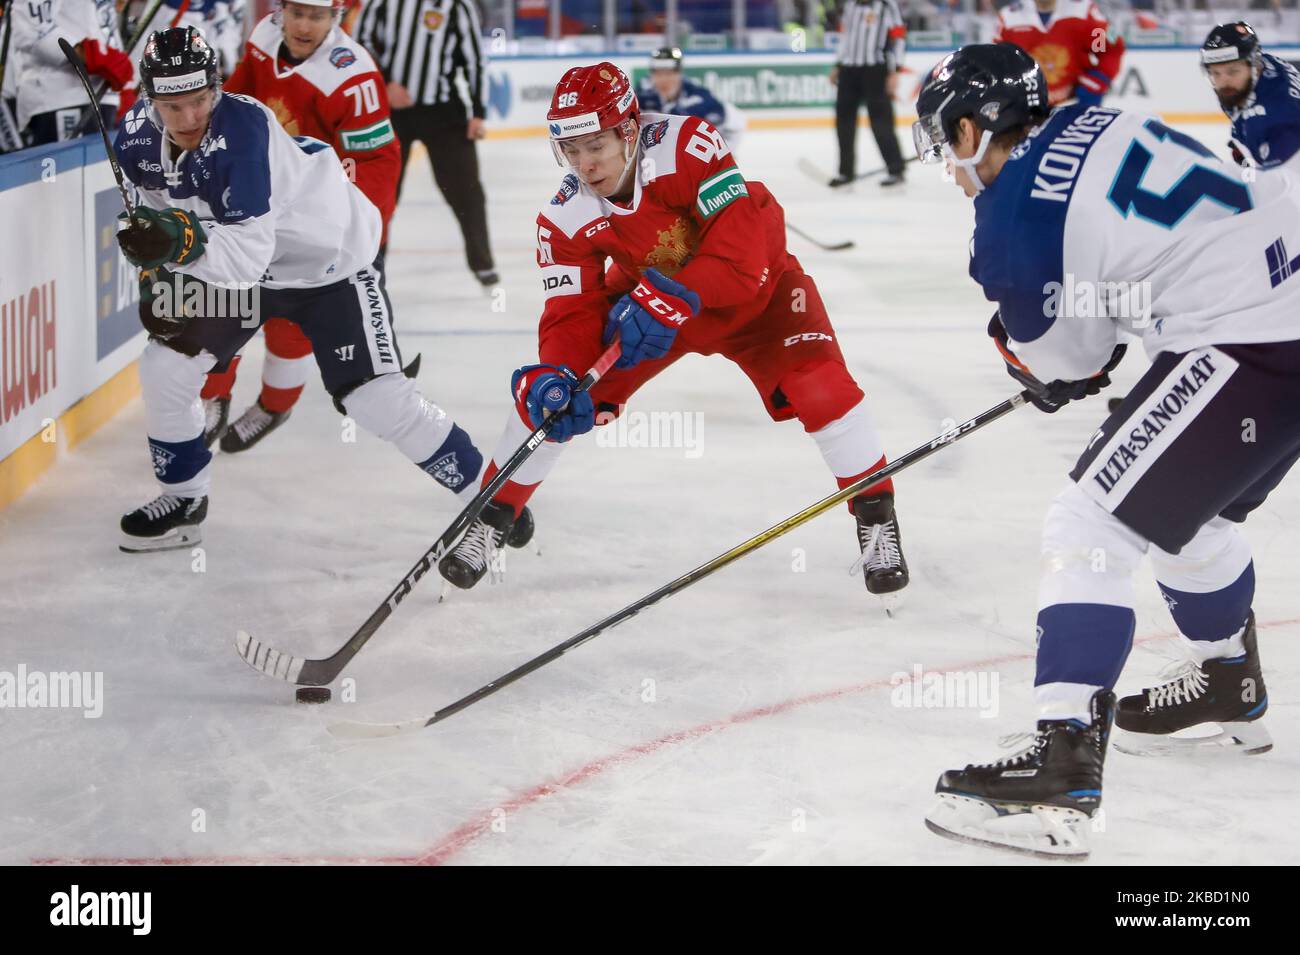 Andrei Kuzmenko (C) of Russia in action against Eemeli Suomi (L) and Miika Koivisto (R) of Finland during the Euro Hockey Tour Channel One Cup ice hockey match between Russia and Finland on December 15, 2019 at Gazprom Arena in Saint Petersburg, Russia. (Photo by Mike Kireev/NurPhoto) Stock Photo